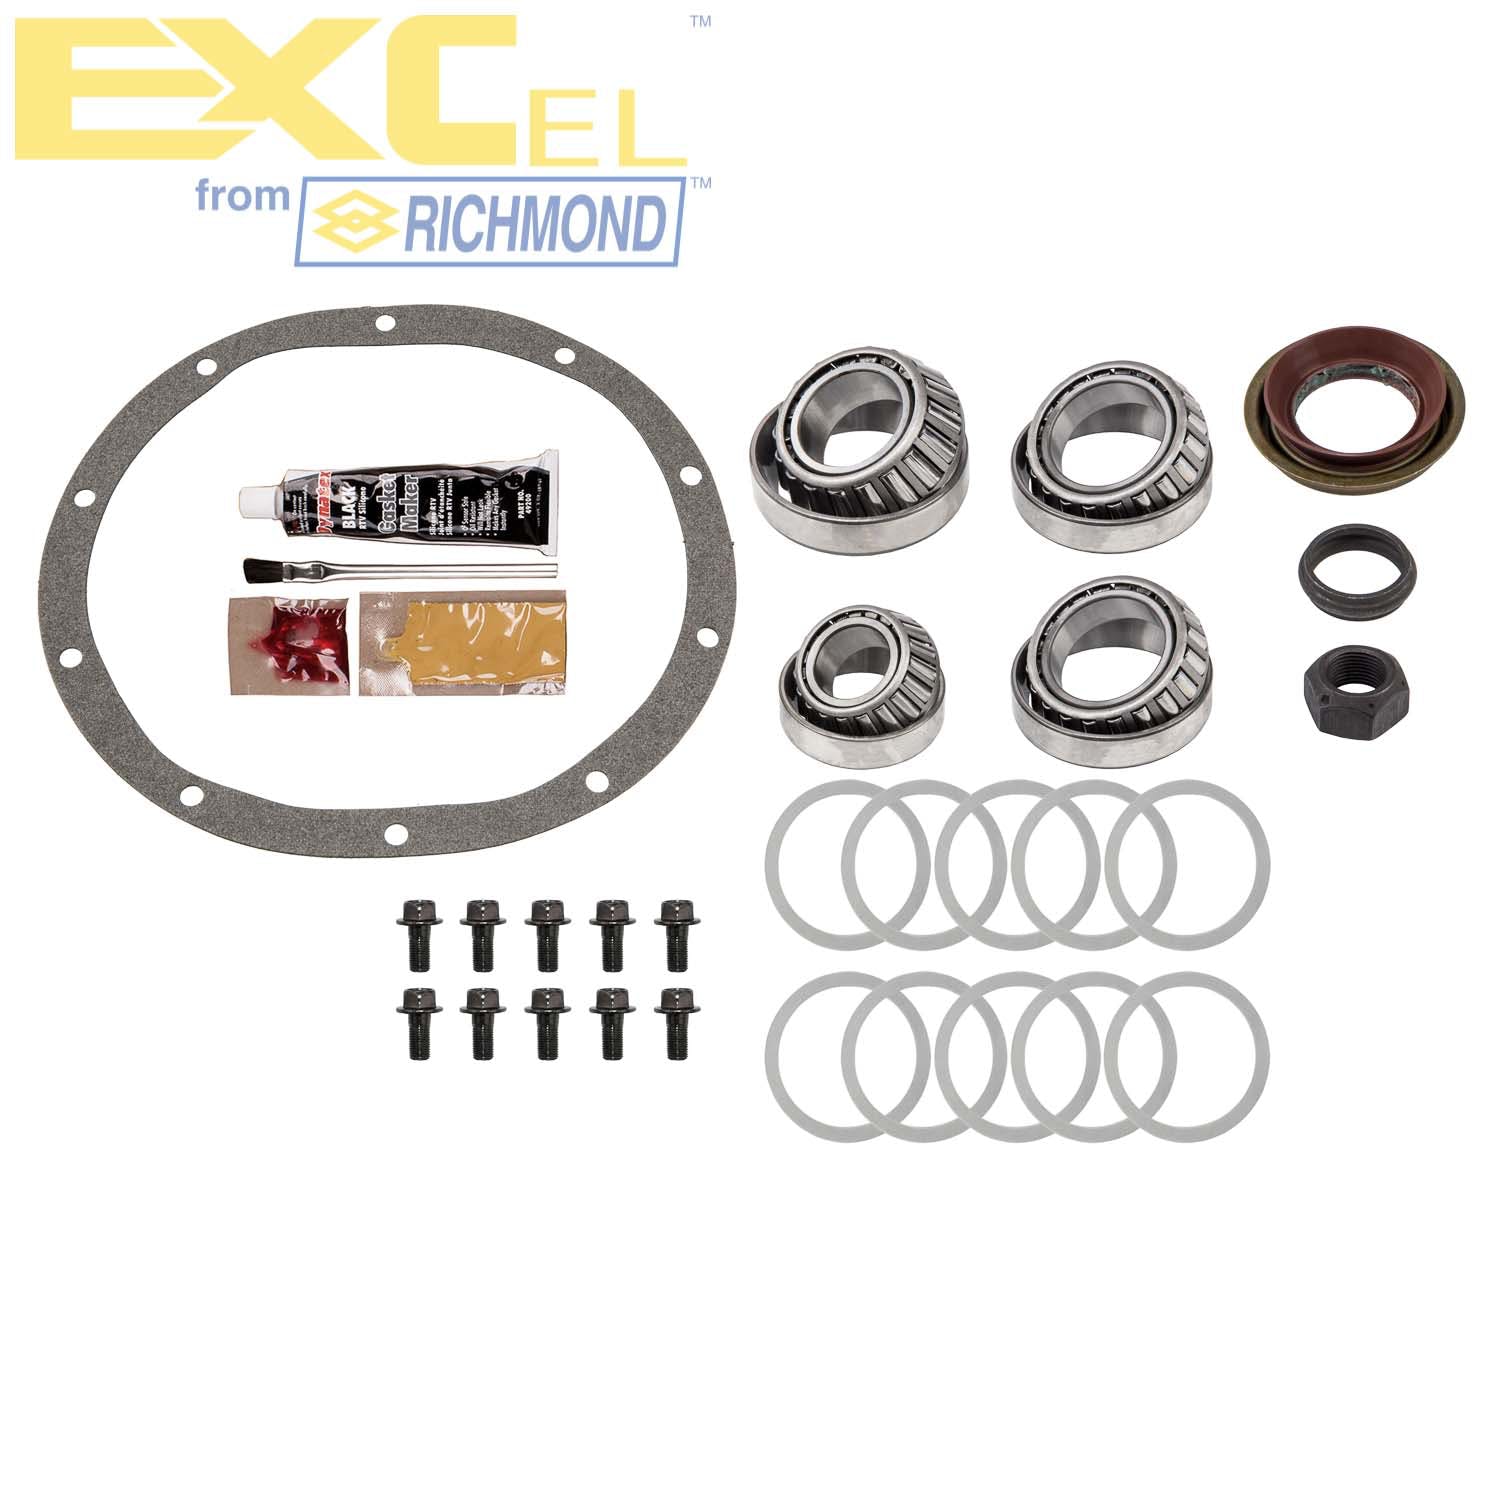 Excel XL-1071-1 Differential Bearing Kit